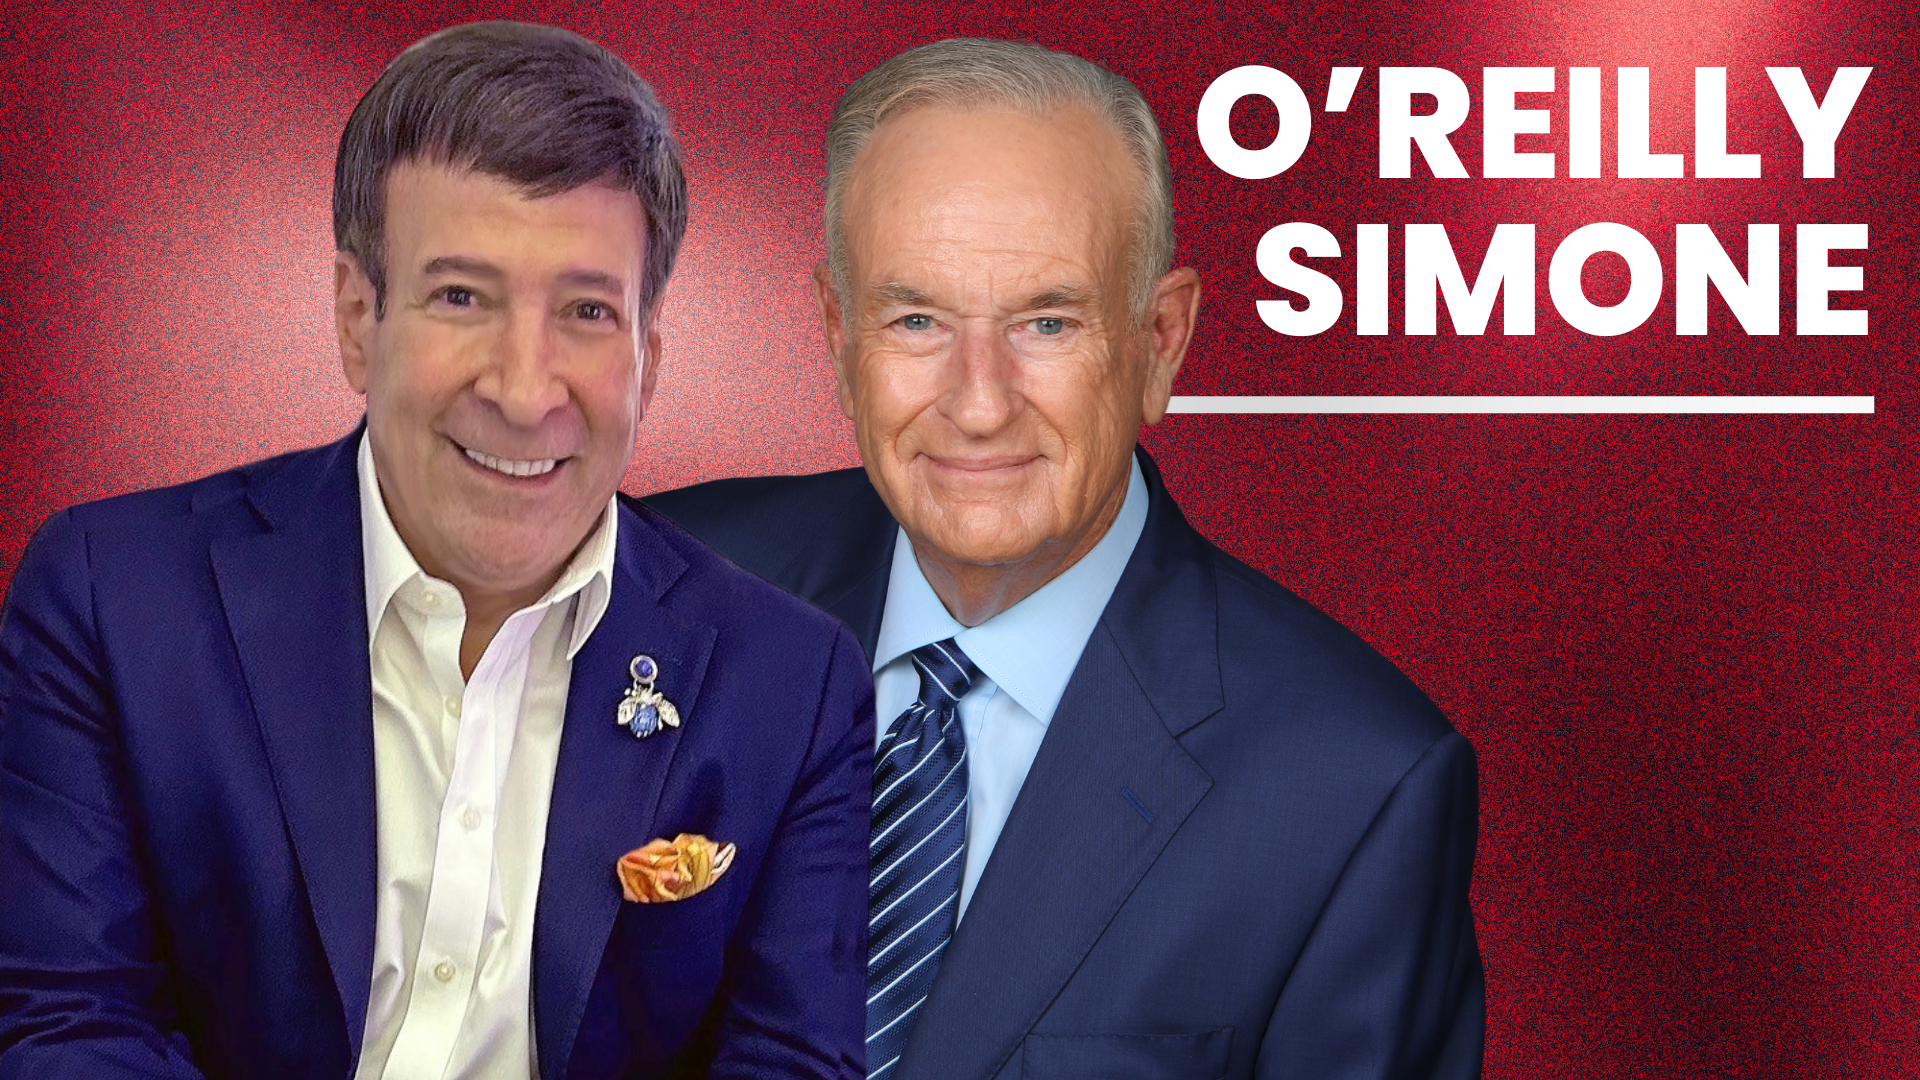 O'Reilly and Simone on Out-of-Control Campuses